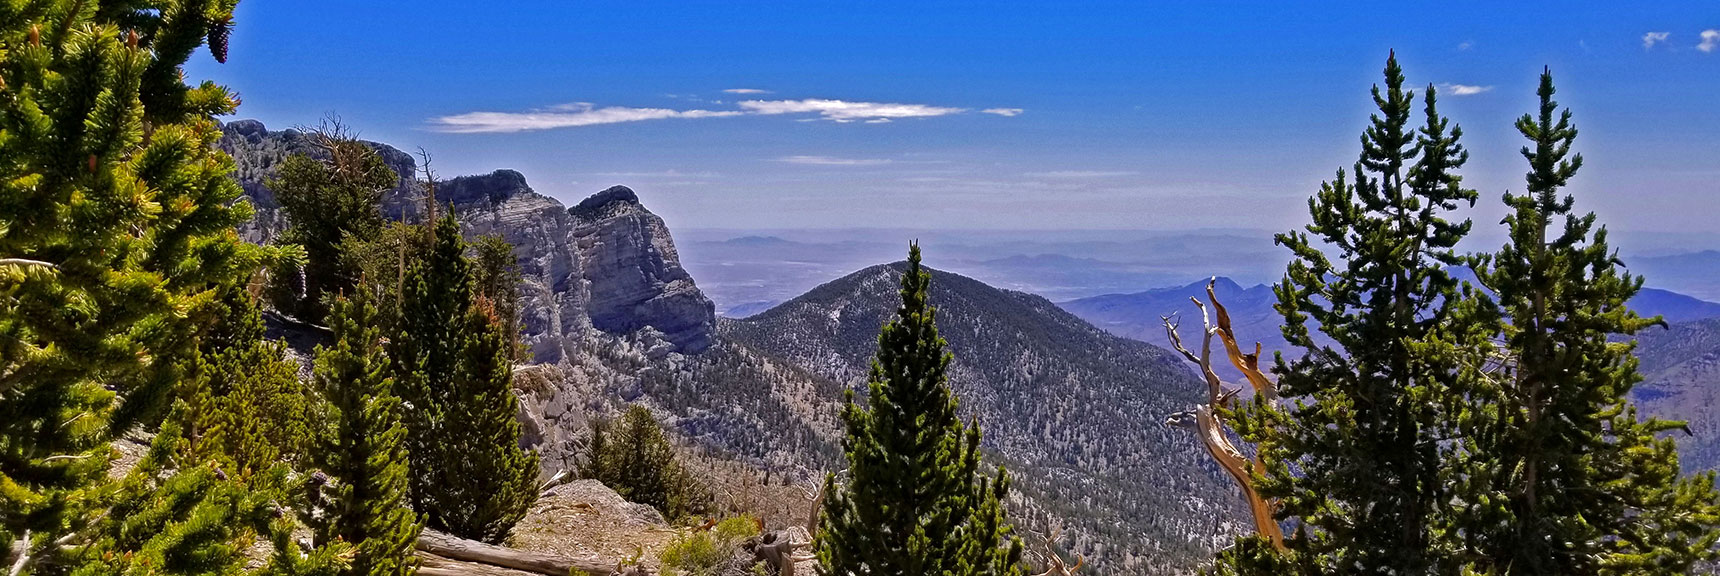 Tip of Mummy Mountain (left), Fletcher Peak (right) | Lee to Kyle Canyon | Foxtail Approach | Mt Charleston Wilderness | Spring Mountains, Nevada